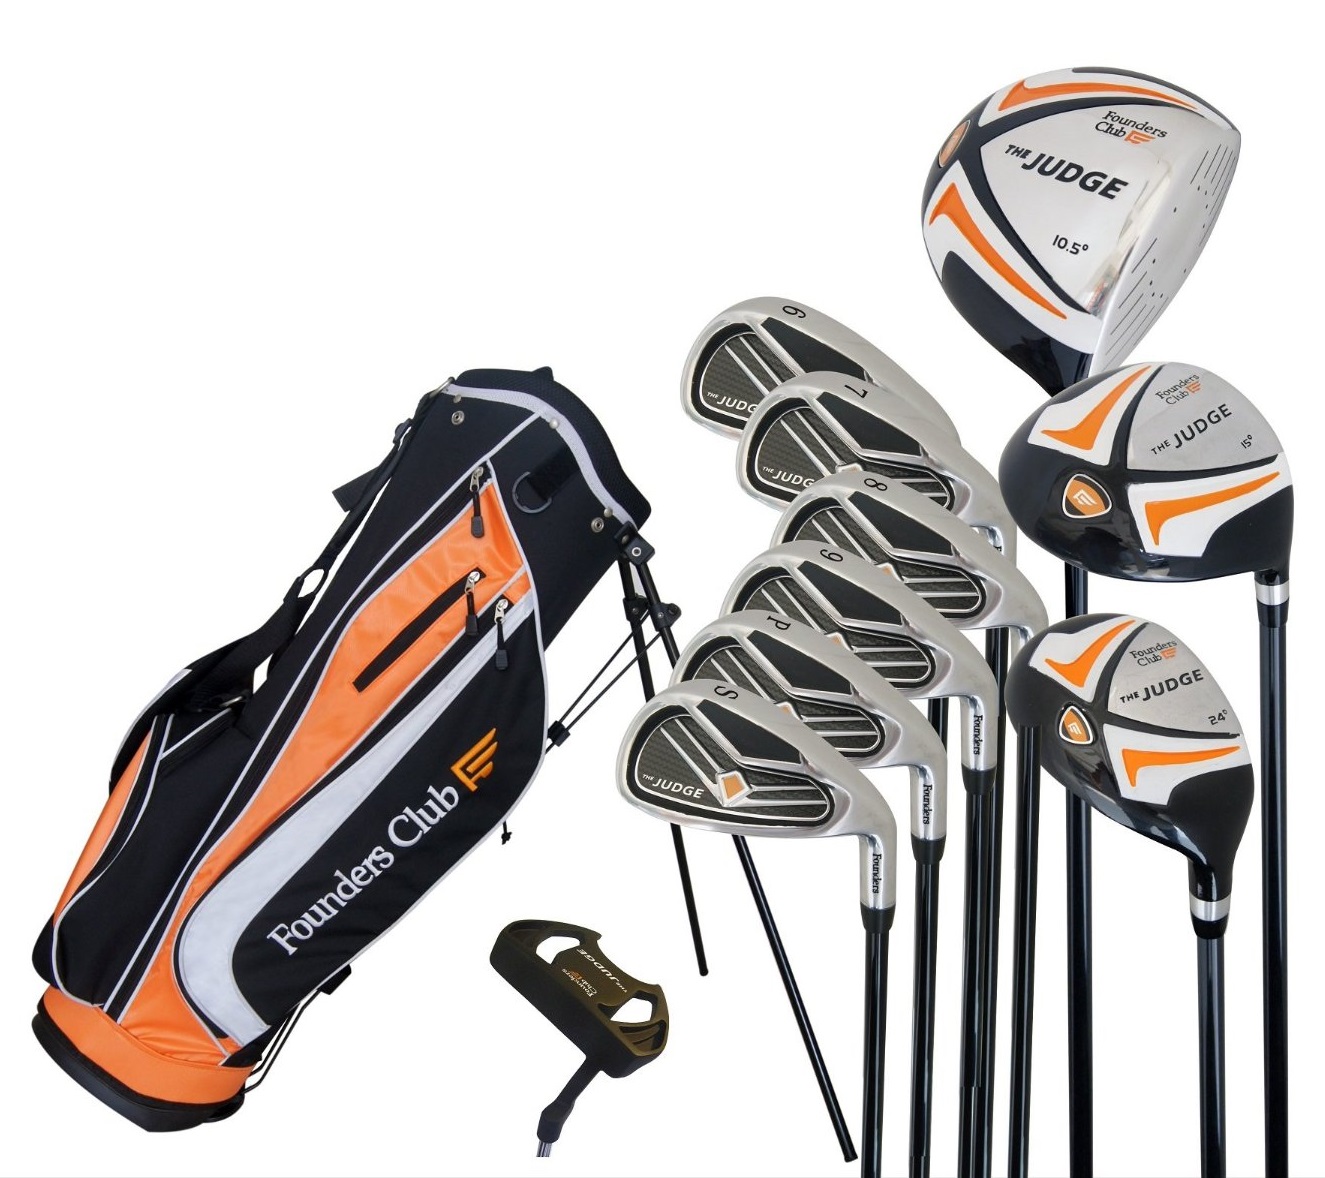 Founders Club Mens The Judge Complete Golf Club Set with Stand Bag